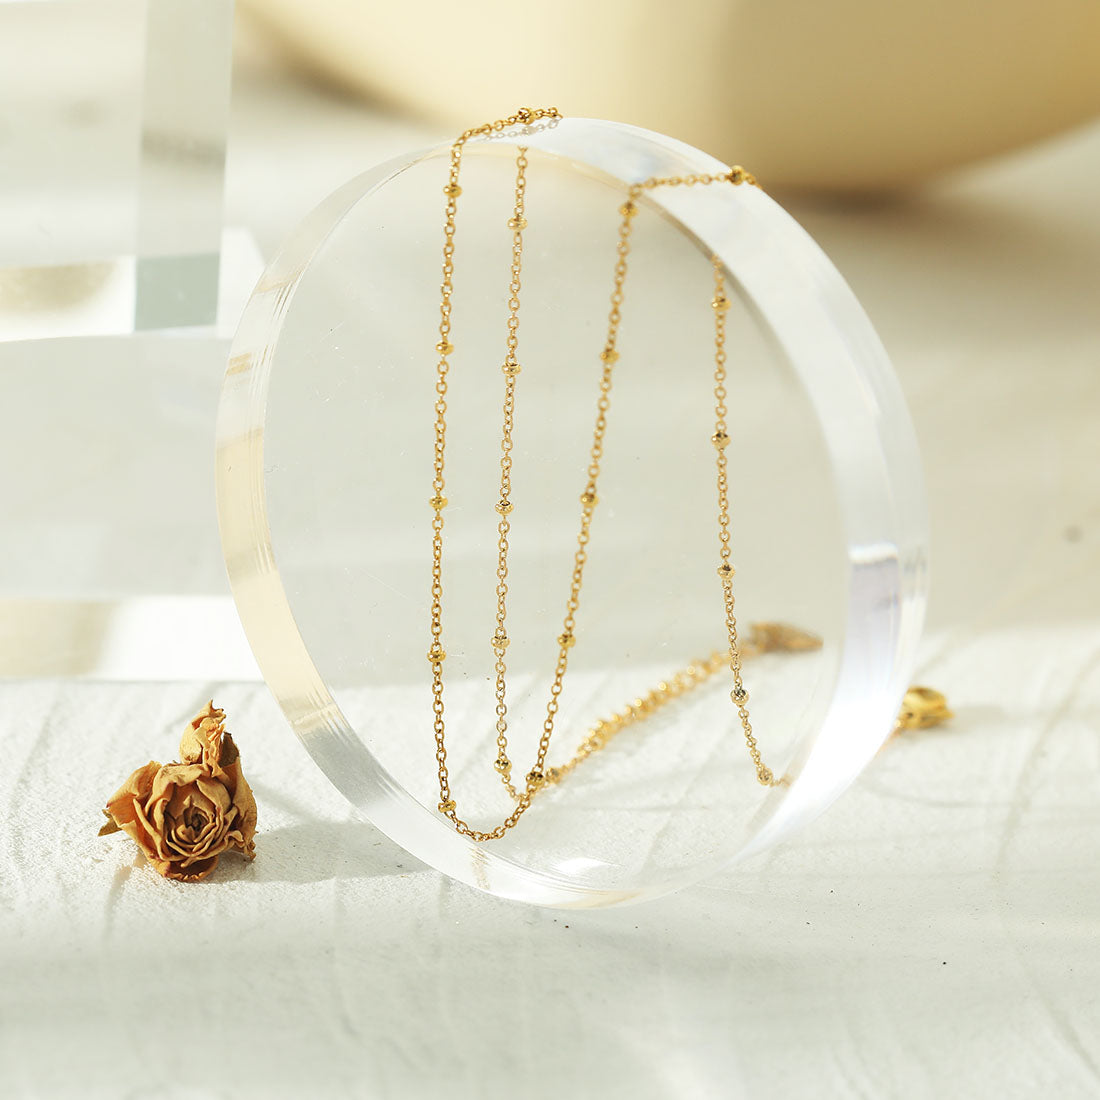 hackney_nine | hackneynine | AVERY210175_necklace | affordable_jewelry | dainty_jewelry | stainless_steel_jewelry | 18K_gold_jewelry | gold_dipped_jewelry | gold-jewelry | circle_jewelry | dainty_necklace | beaded_necklace dressy_jewellery | classy_ jewellery | on_trend_jewellery | fashion_ jewellery | cool_jewellery | affordable_jewellery | designer_jewellery | vintage_jewellery | heart_jewellery | gifts-for-her | gifts-for-mum | gifts-for-girls | gifts-for-females